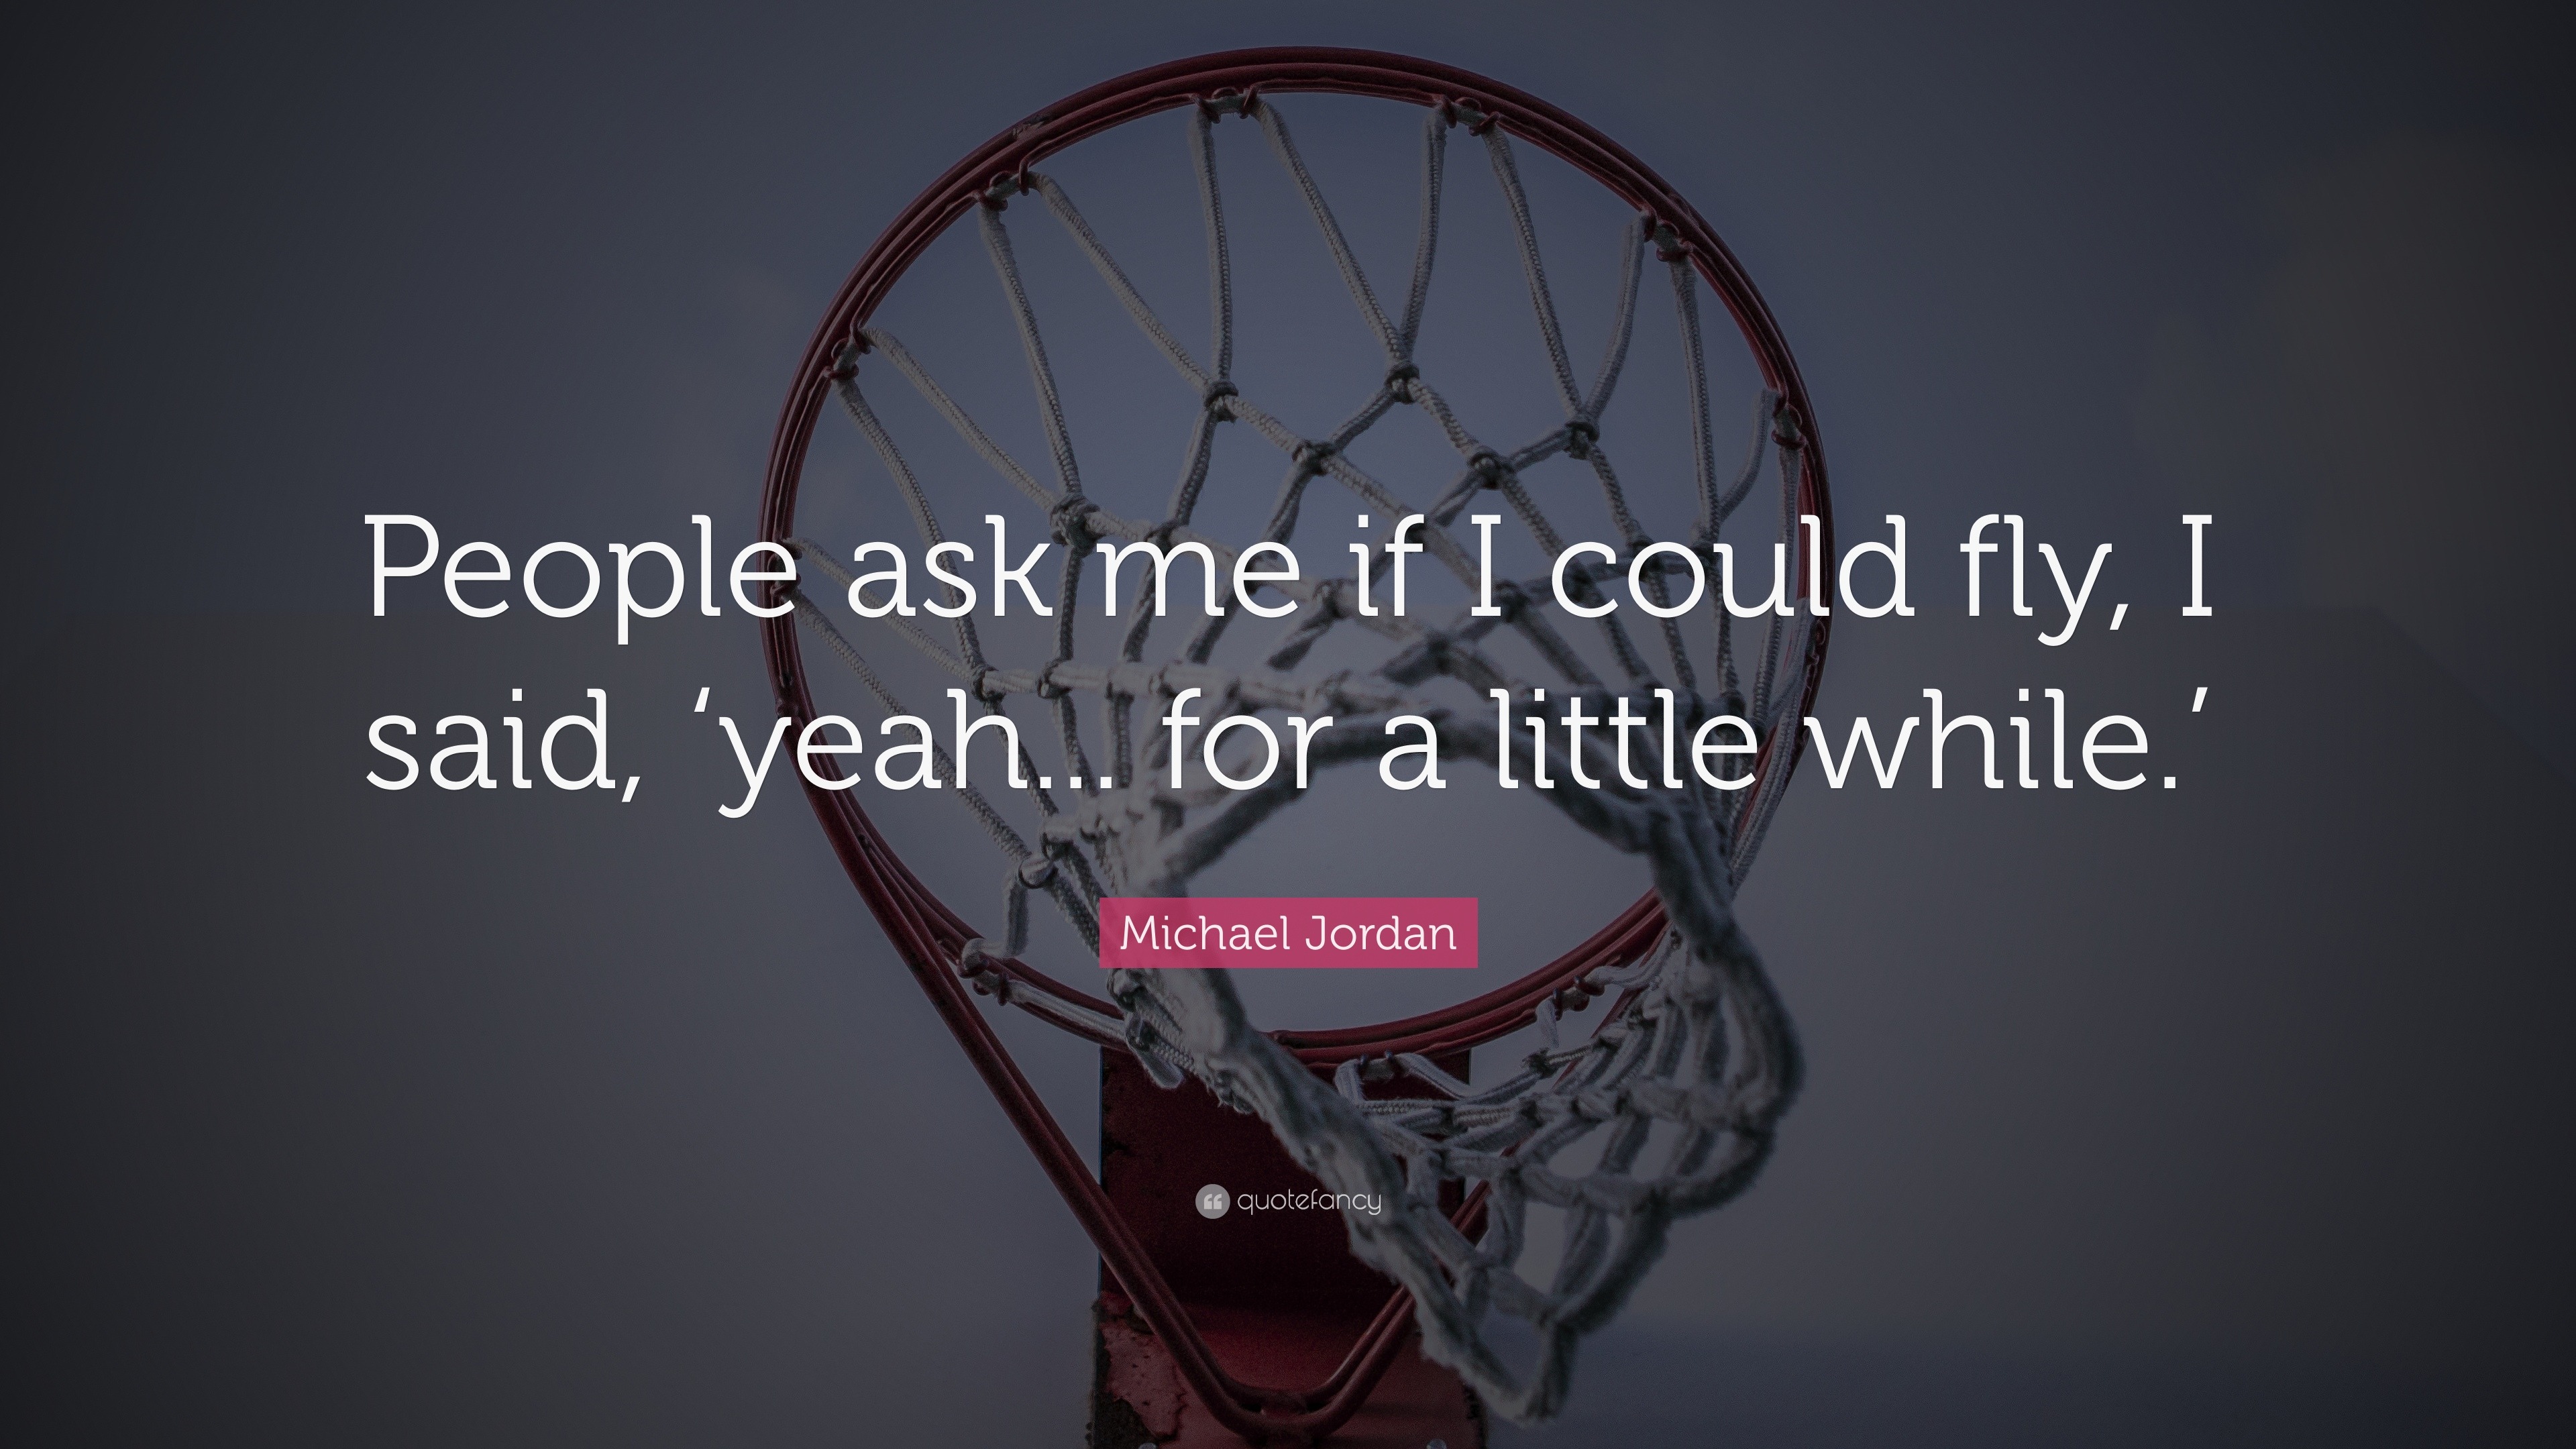 Basketball Motivational Quotes Beautiful Motivational Quotes For